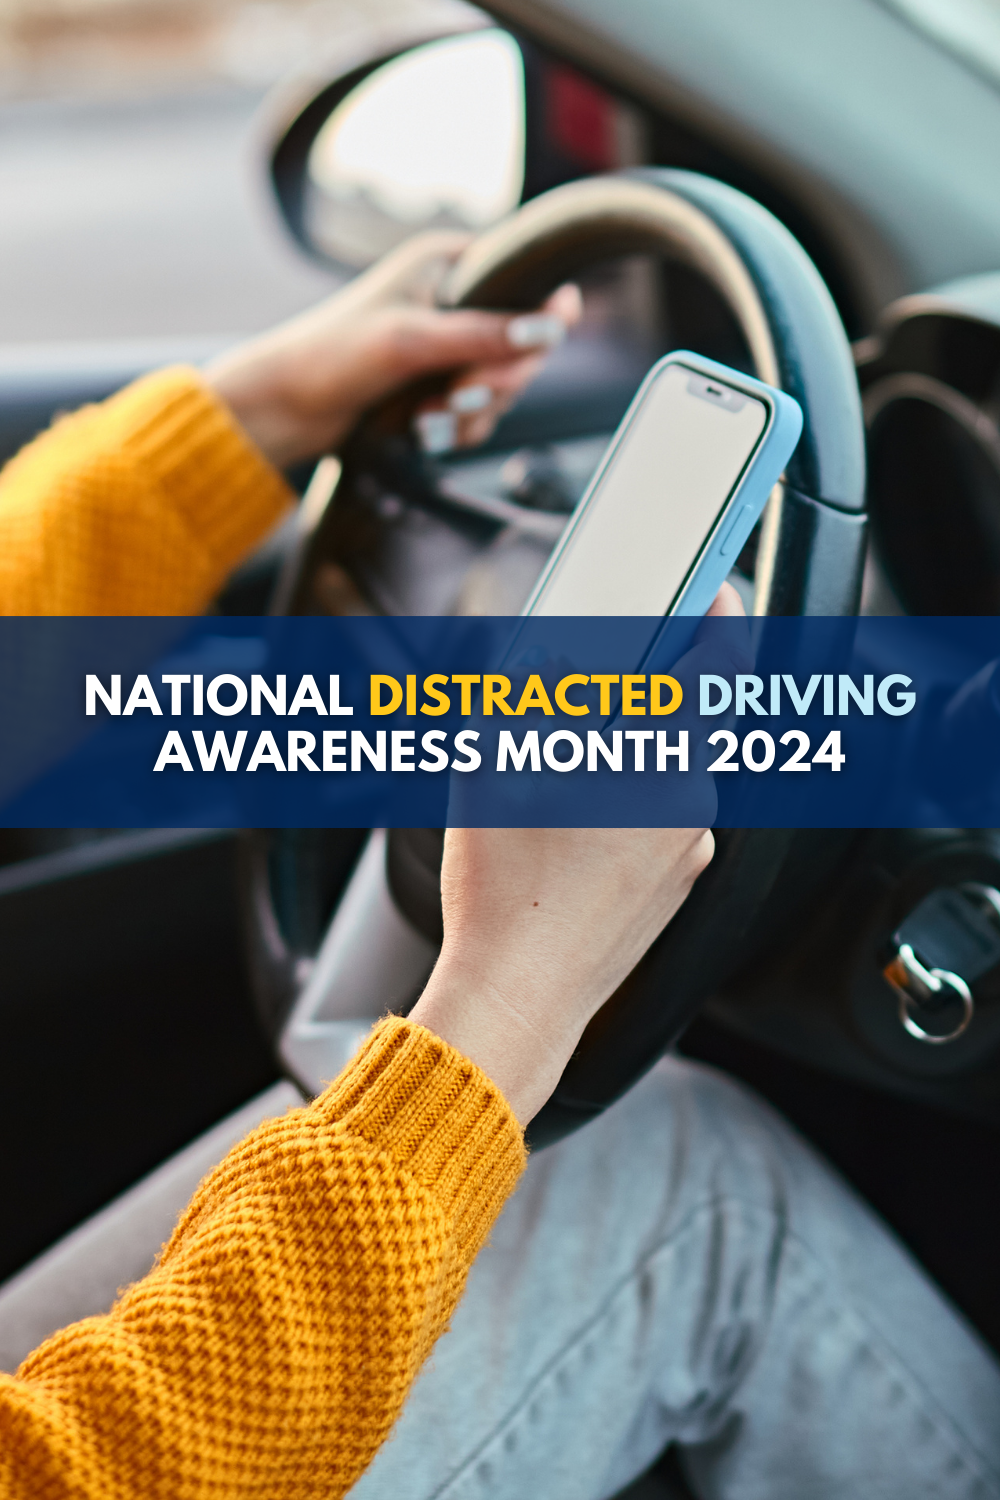 National Distracted Driving Awareness Month: April 2024